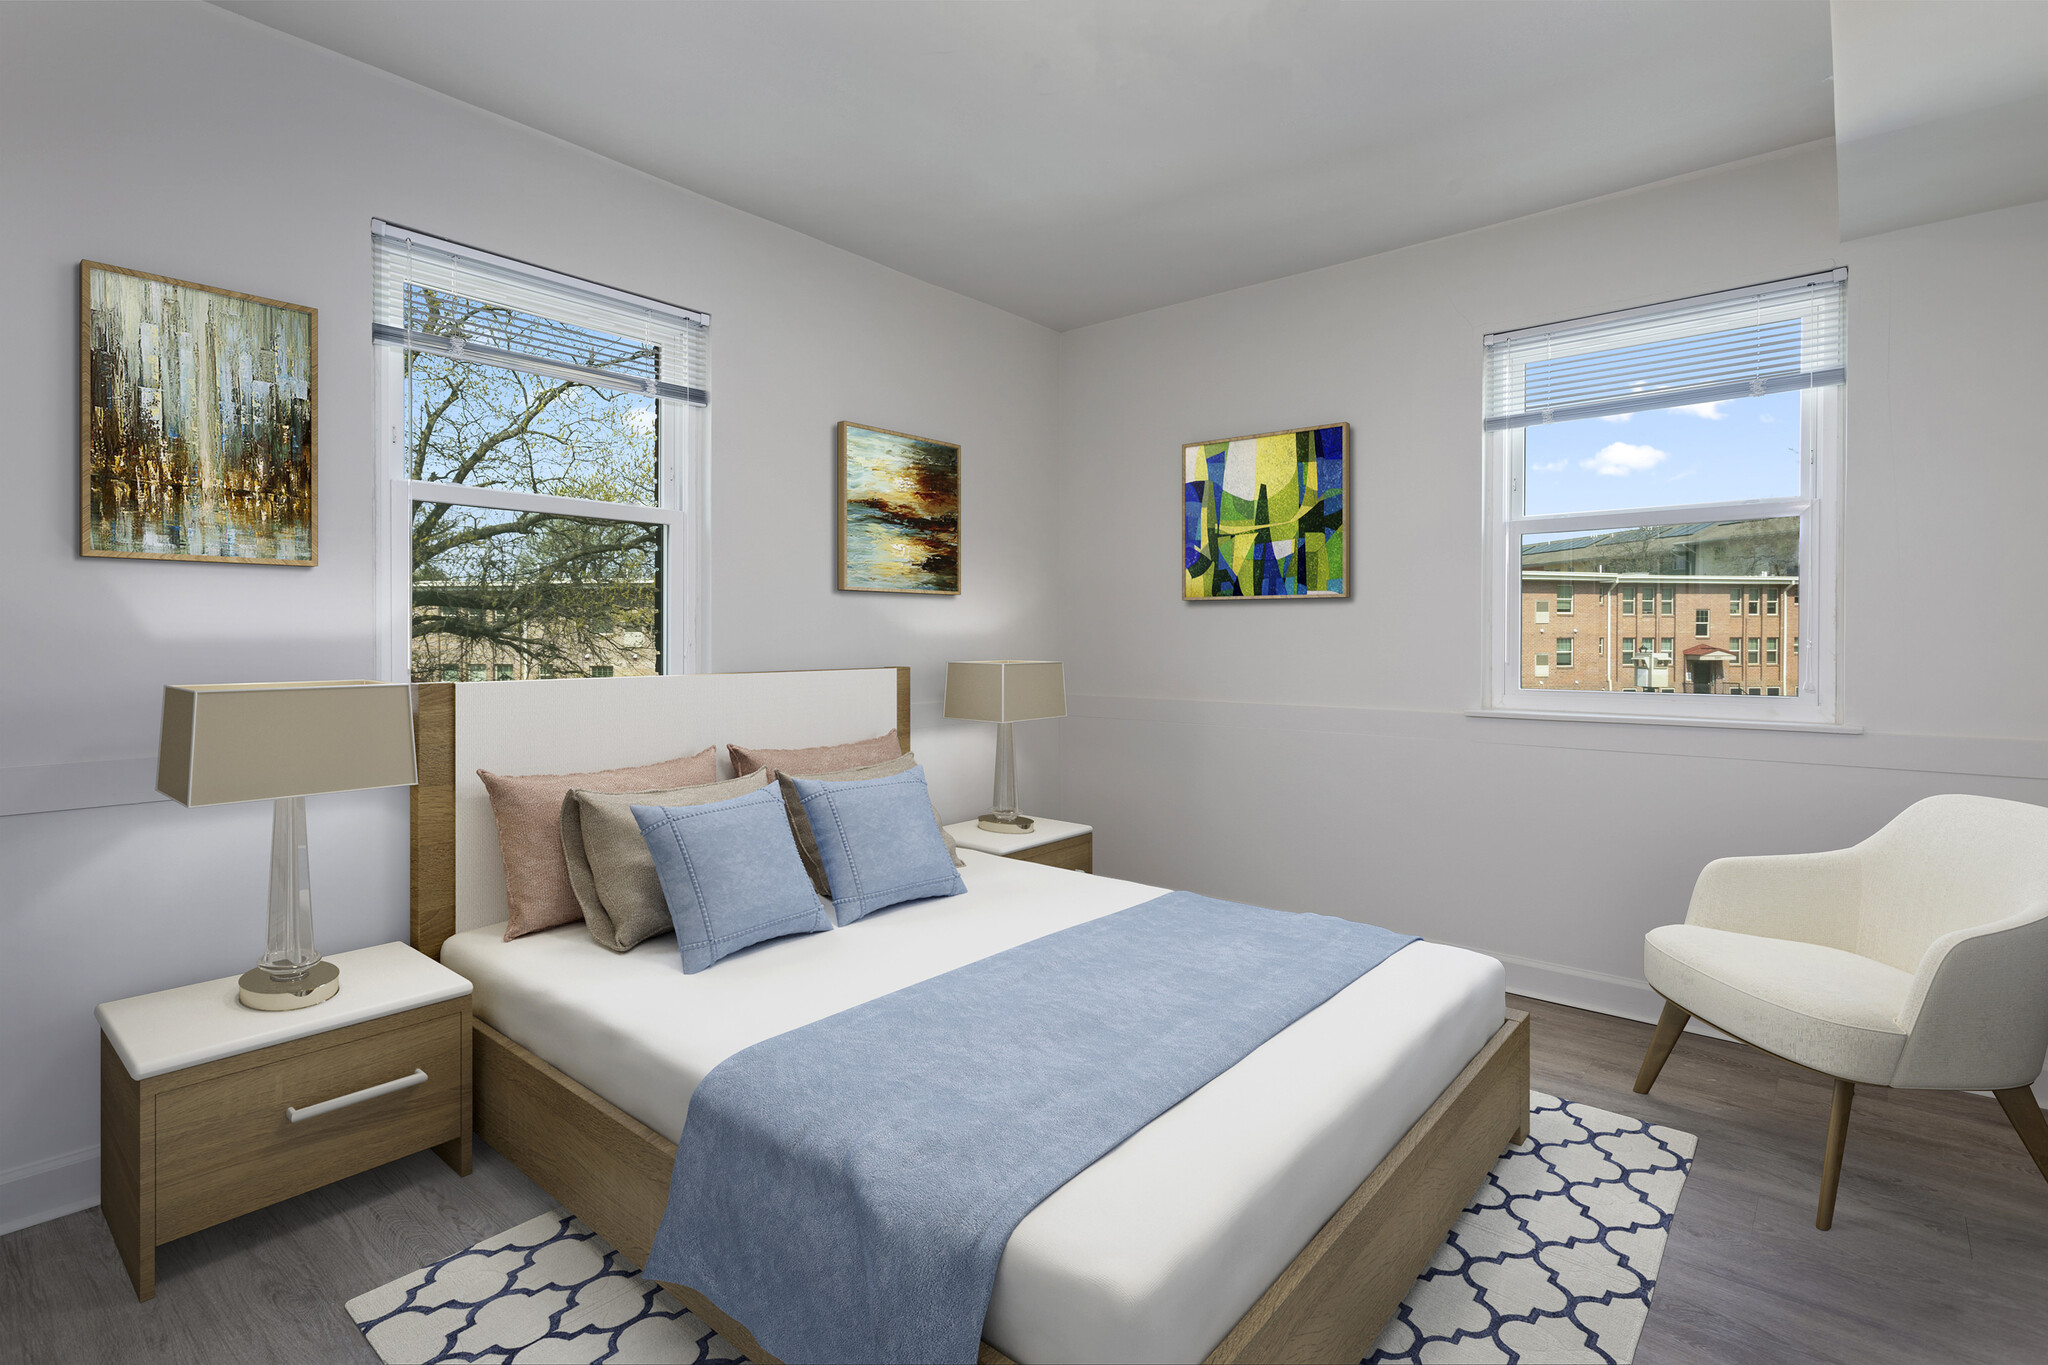 beautiful bed in a spacious bedroom at Hanover Courts Apartments, located in Washington, DC